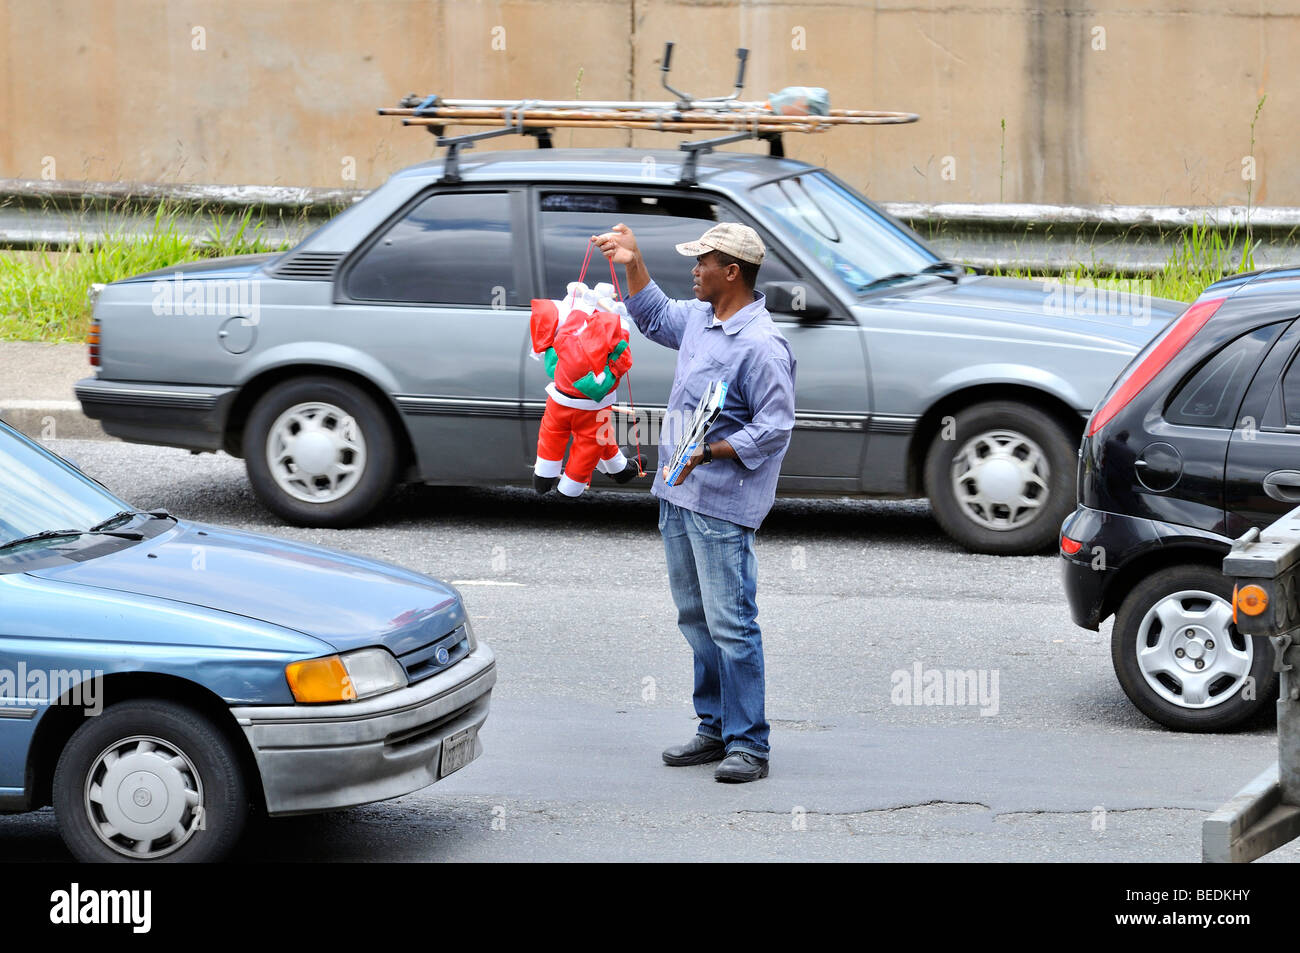 Man selling Father Christmas dolls in a traffic jam, Bras district, Sao Paulo, Brazil, South America Stock Photo